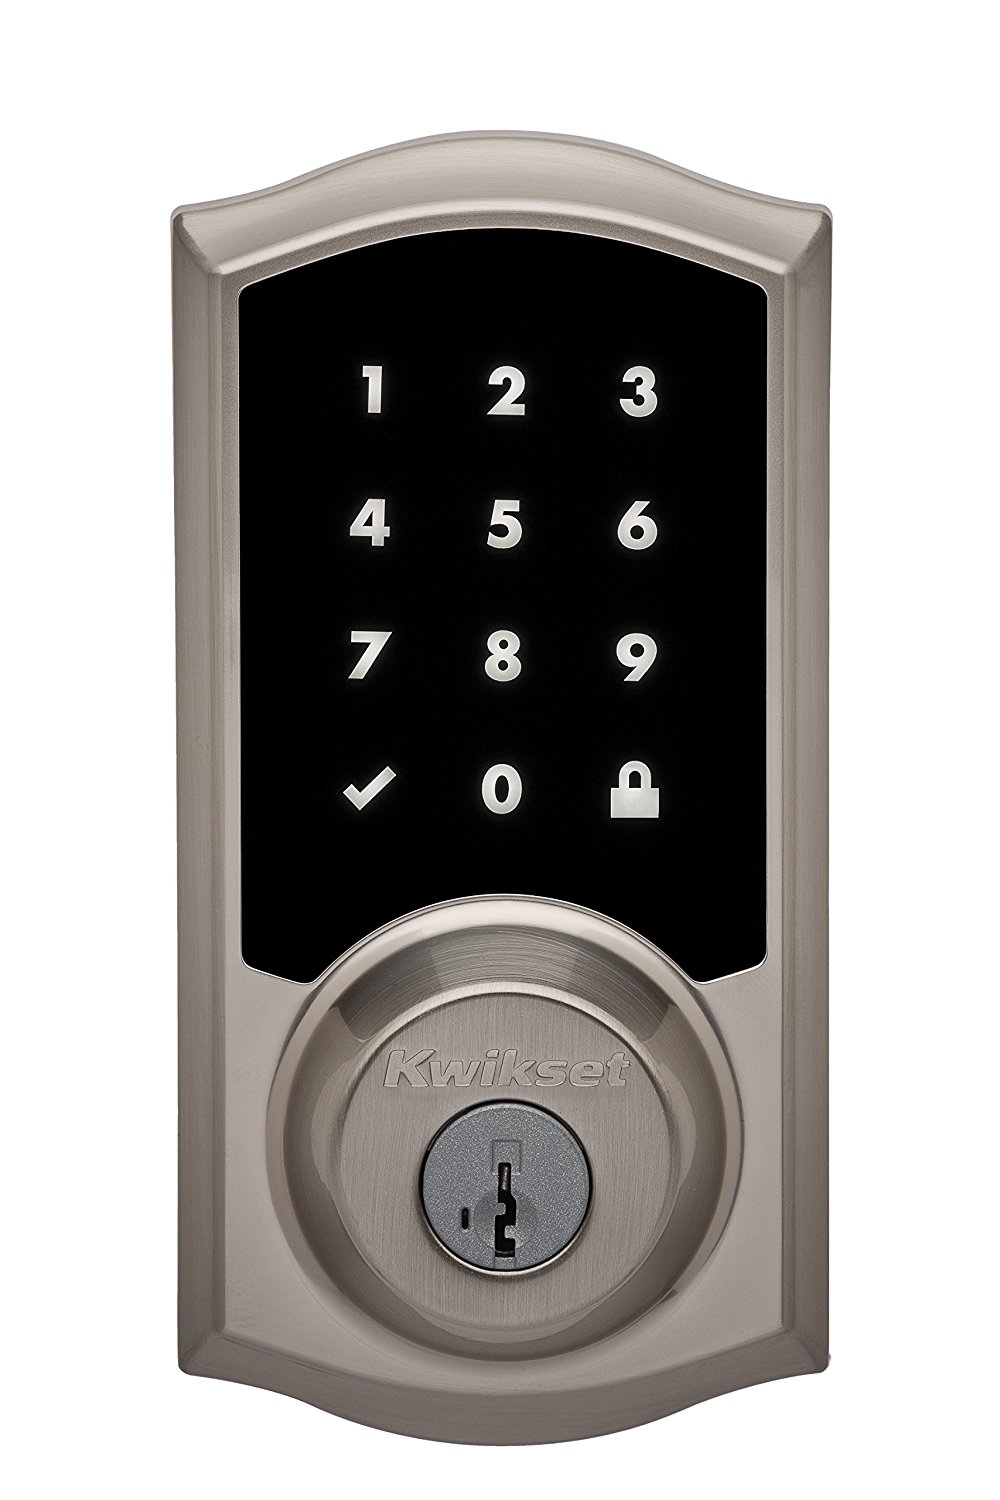 Kwikset Premis Touchscreen Smart Lock With Apple HomeKit Support on Sale for 29% Off [Deal]